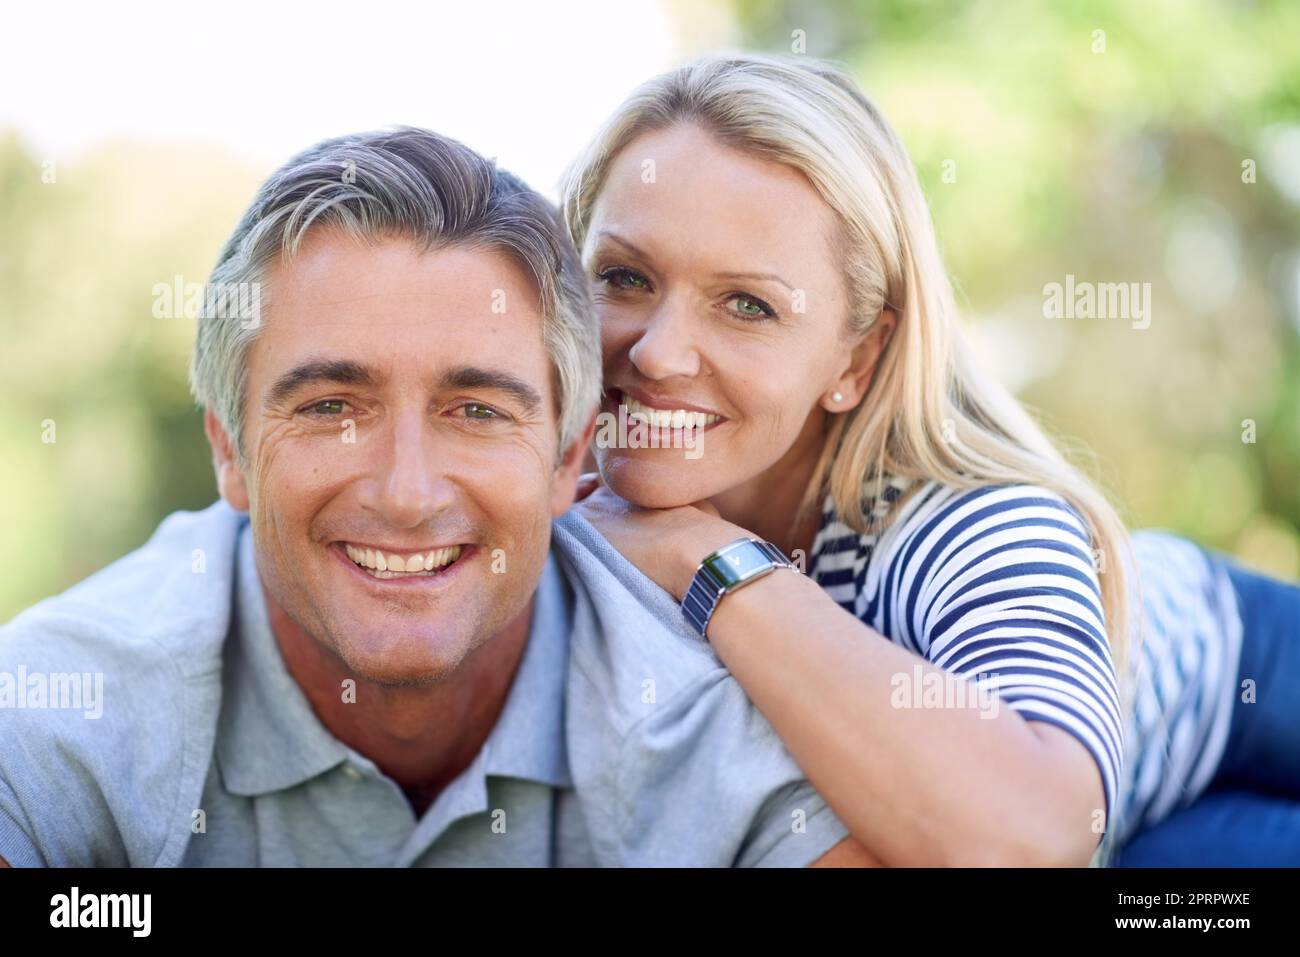 Romance inspired by natures beauty. Cropped portrait of an affectionate mature couple in the park. Stock Photo